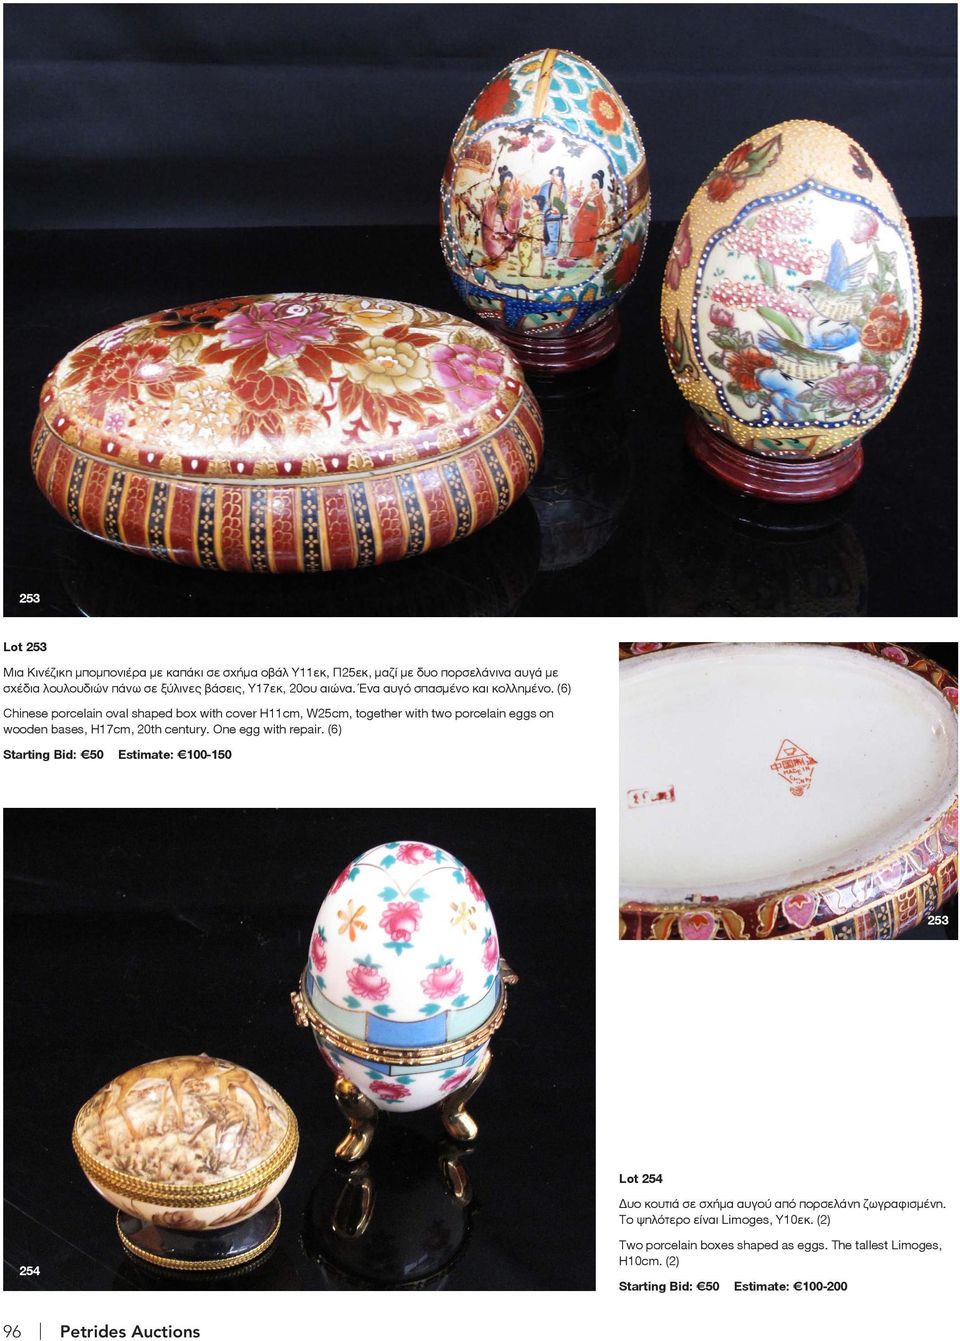 (6) Chinese porcelain oval shaped box with cover H11cm, W25cm, together with two porcelain eggs on wooden bases, H17cm, 20th century. One egg with repair.